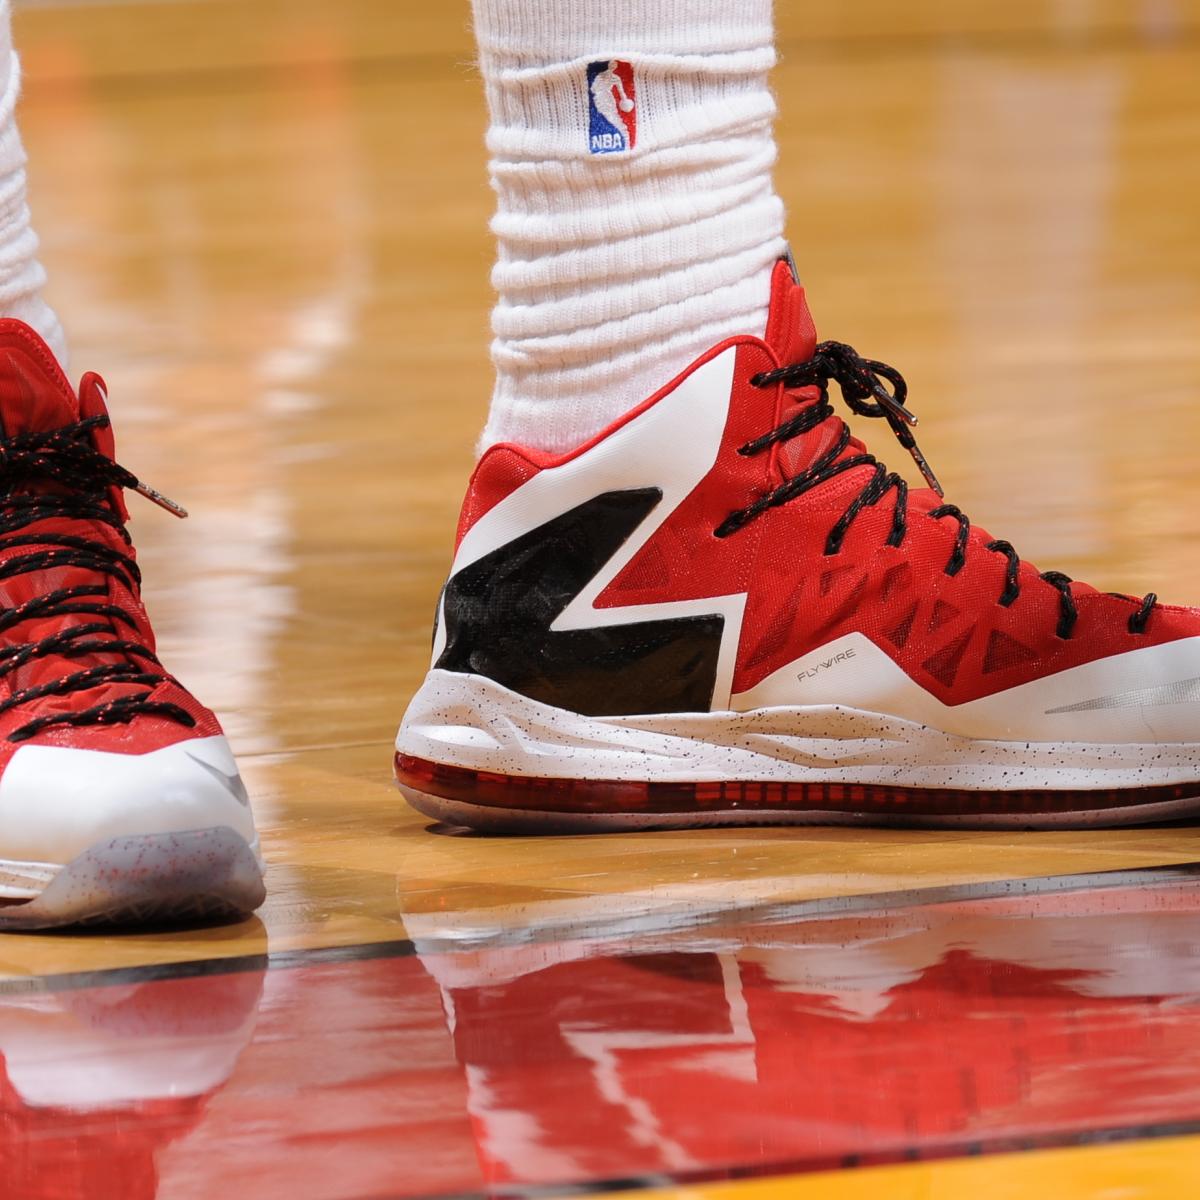 LeBron James' Shoes For Game 2 of the NBA Finals | Bleacher Report | Latest News ...1200 x 1200